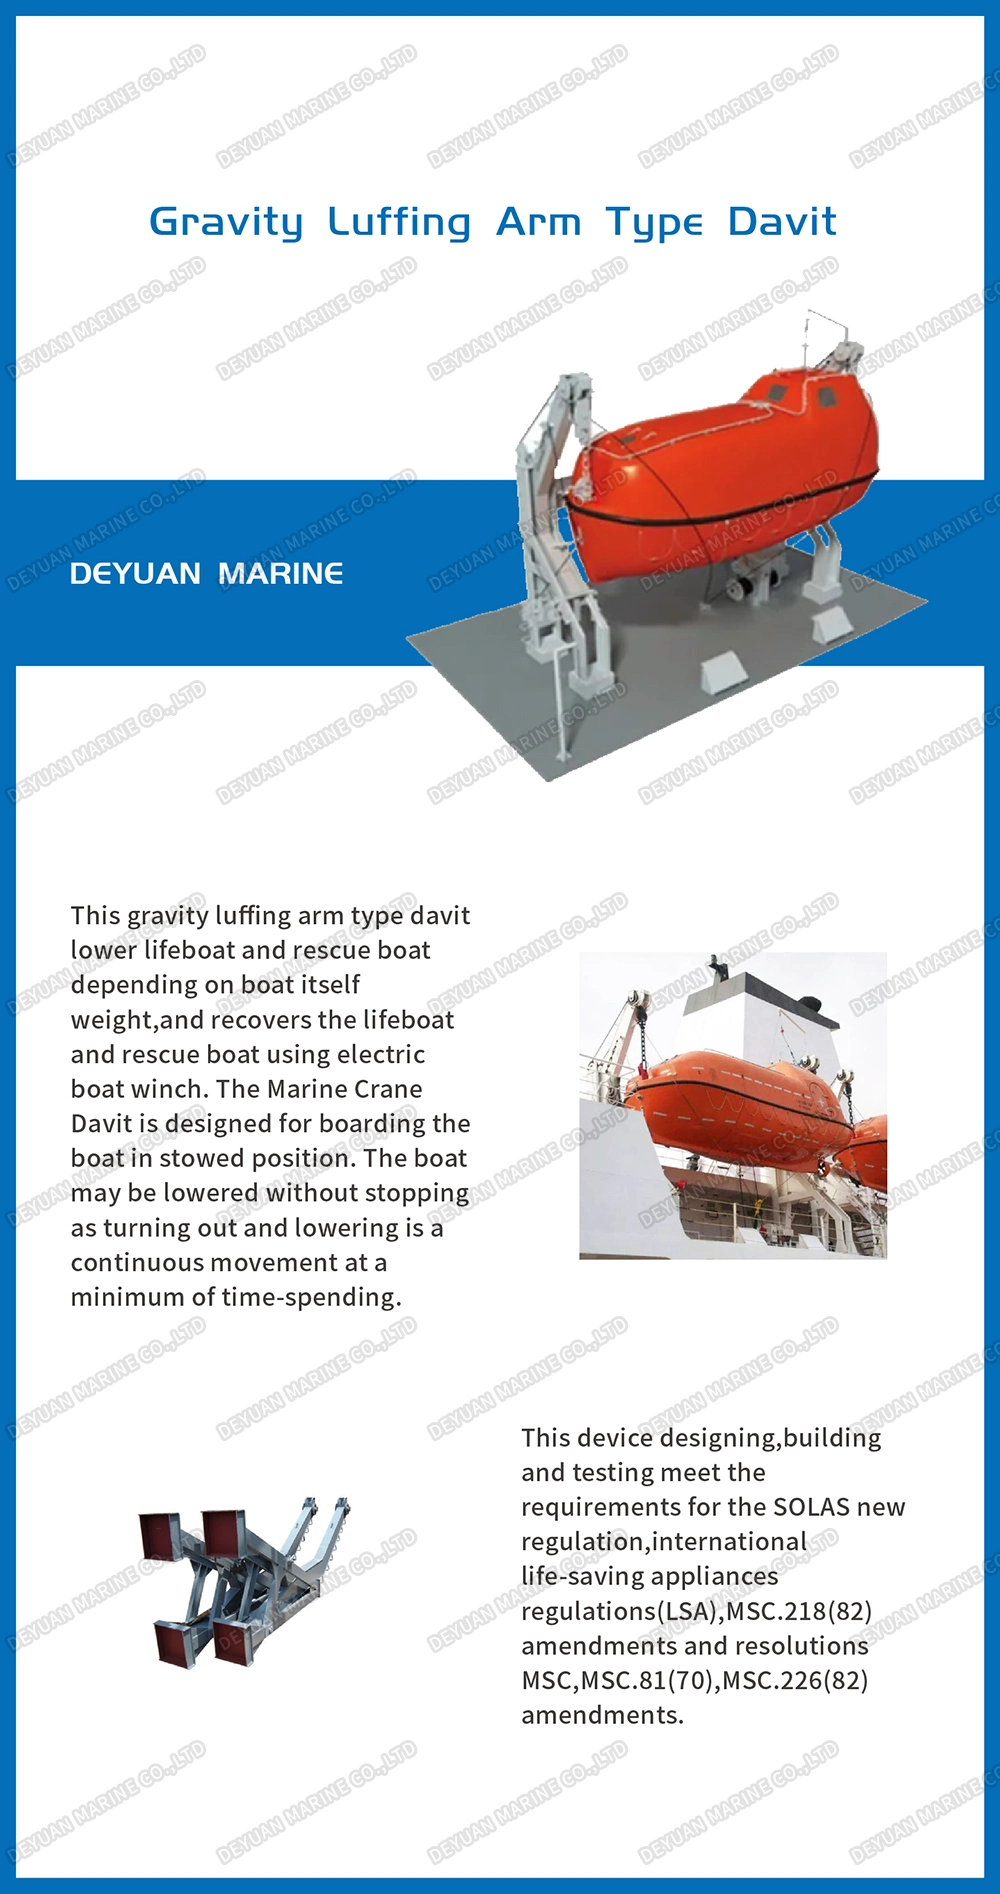 Solas Standard Inverted Arm Gravity Davit for Totally Enclosed Lifeboat